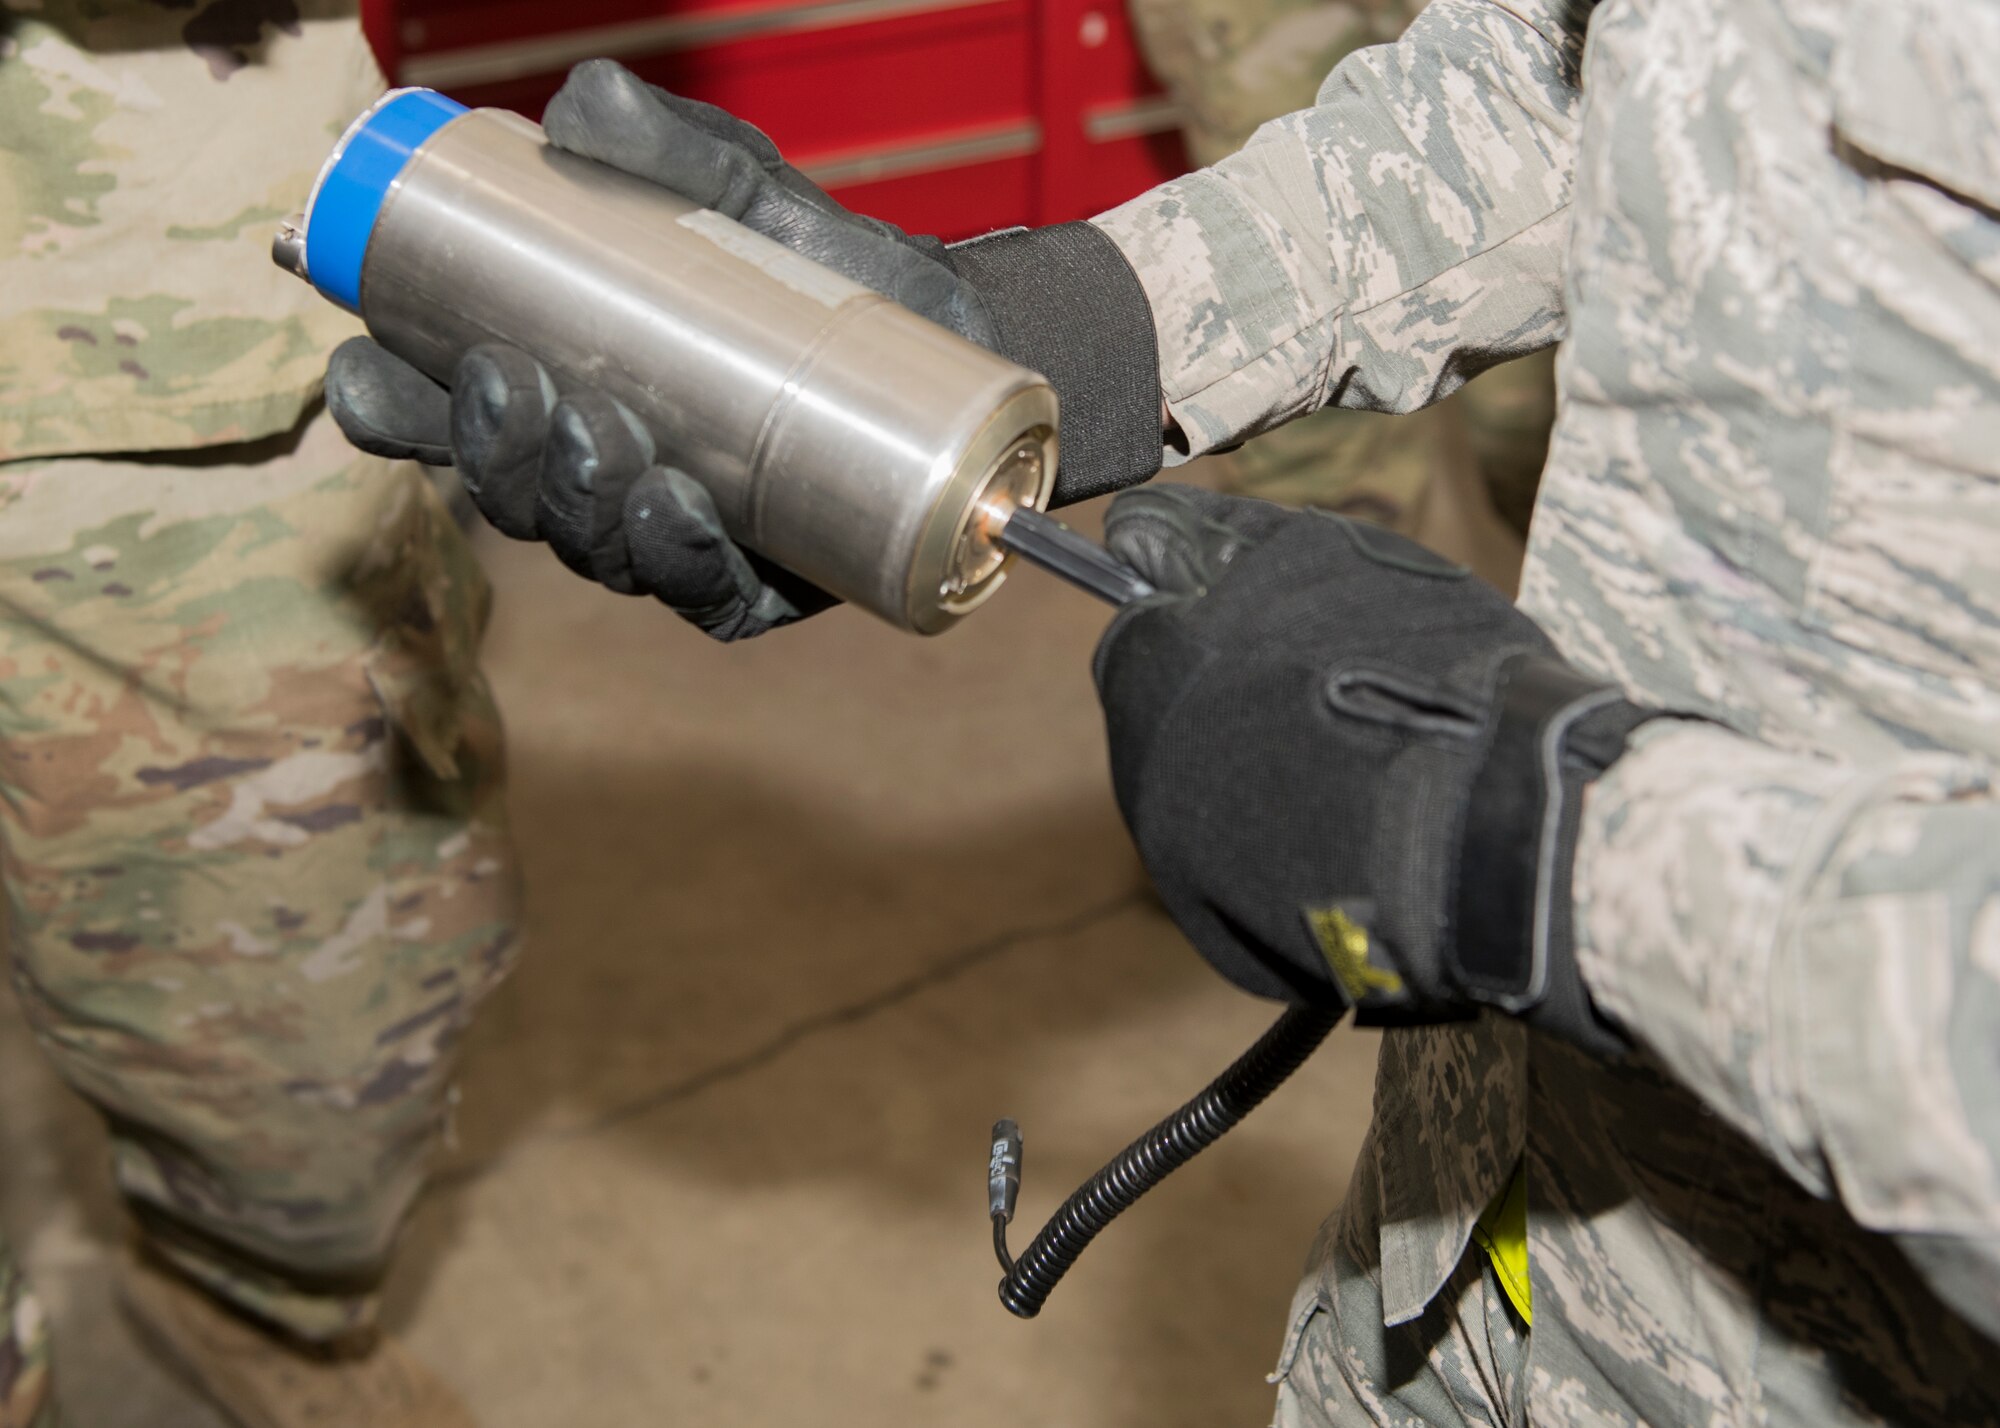 U.S. Air Force Airman 1st Class George Antuna, a 3rd Munitions Squadron precision-guided munitions technician, installs a cable assembly into a fuze at a combat munitions training class at Joint Base Elmendorf-Richardson, Alaska, Nov. 5, 2020. U.S. Air Force Tech. Sgt. Nicholas Kern, the 3rd MUNS training section chief, revamped his squadron’s training section and implemented an expanded CMT program that familiarizes ammo troops with a variety of munitions in one location.